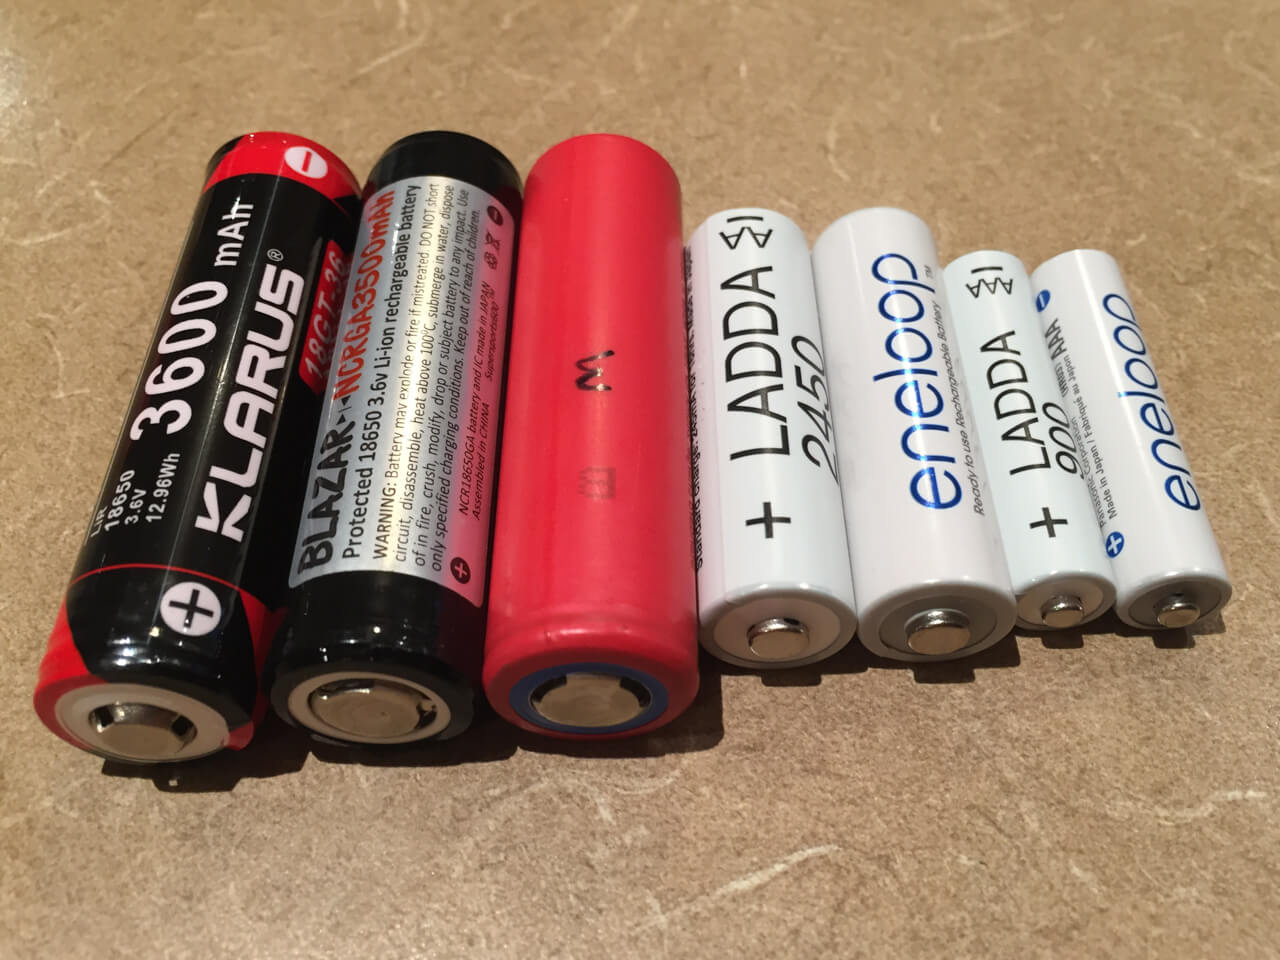 Battery selection